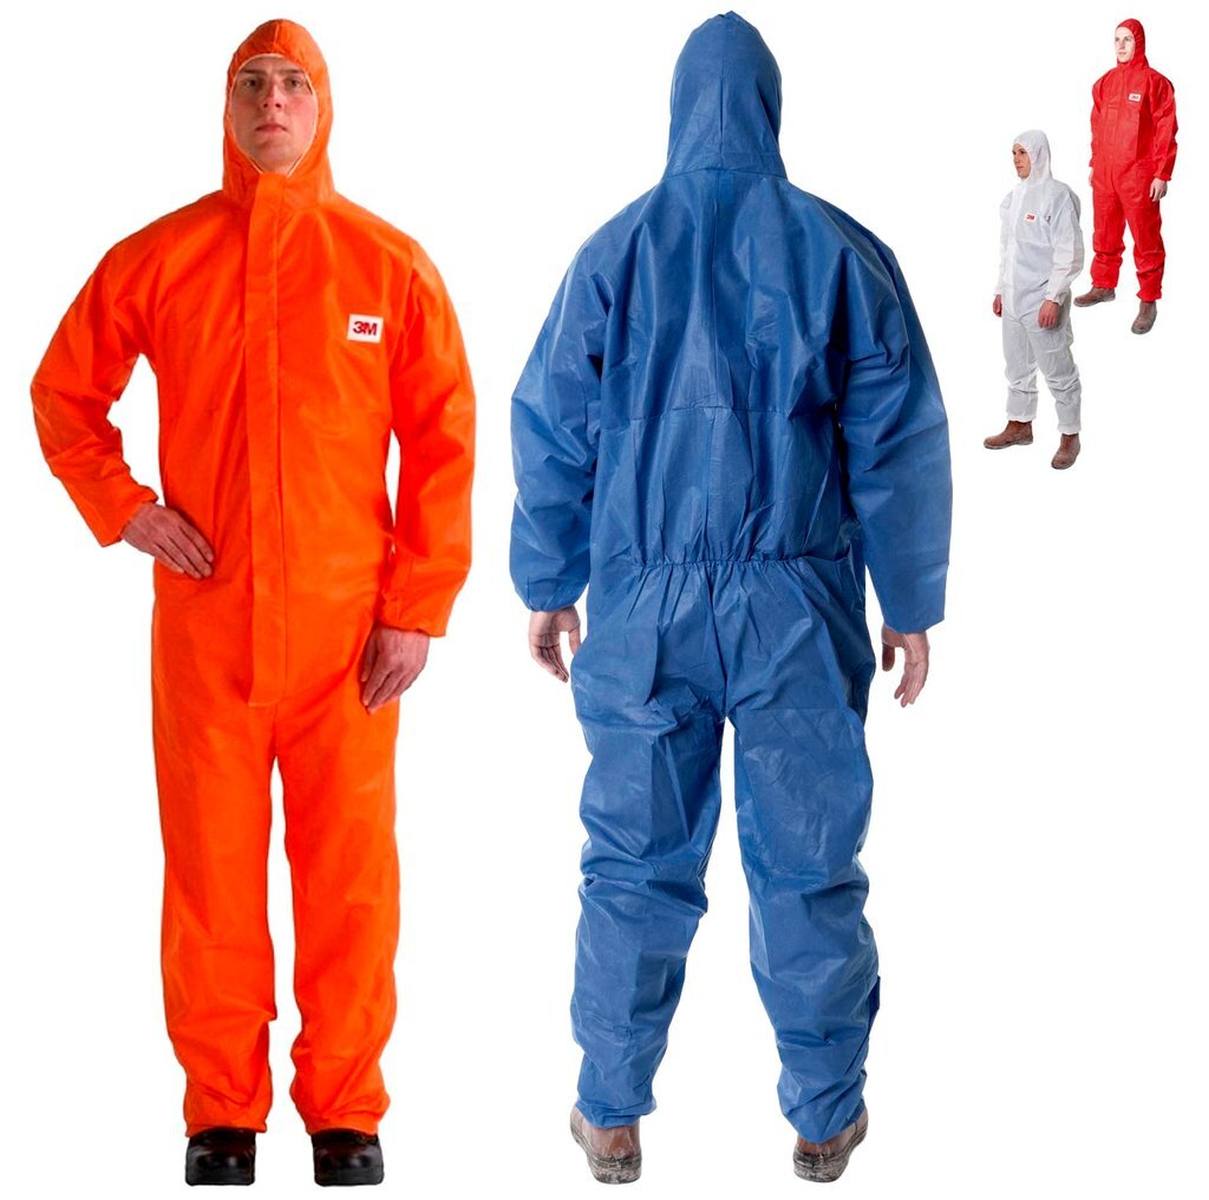 3M 4515B Protective coverall, blue, TYPE 5/6, size L, material SMMS low-lint, elastic band finish